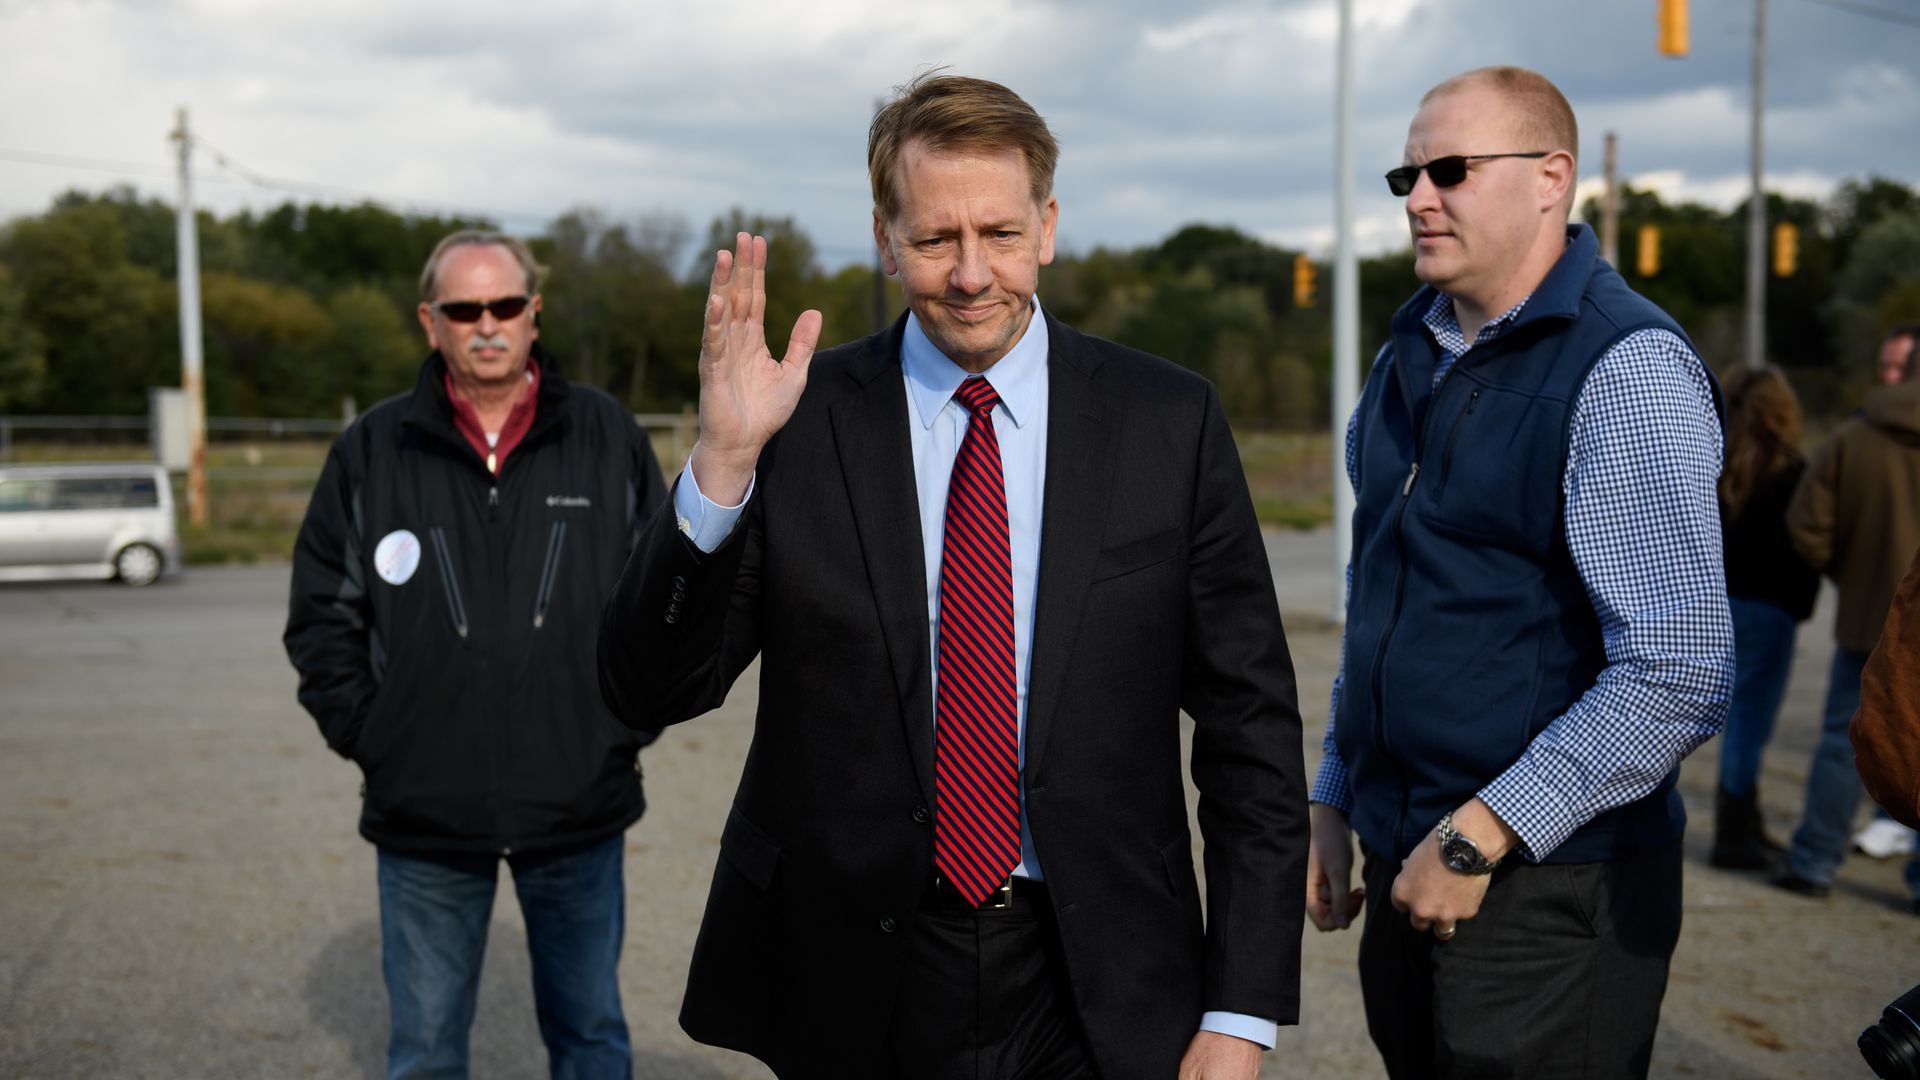  Richard Cordray holds a press conference with labor leaders from the UAW and USW at the site of the former RG Steel on October 23, 2018 in Warren, Ohio. 